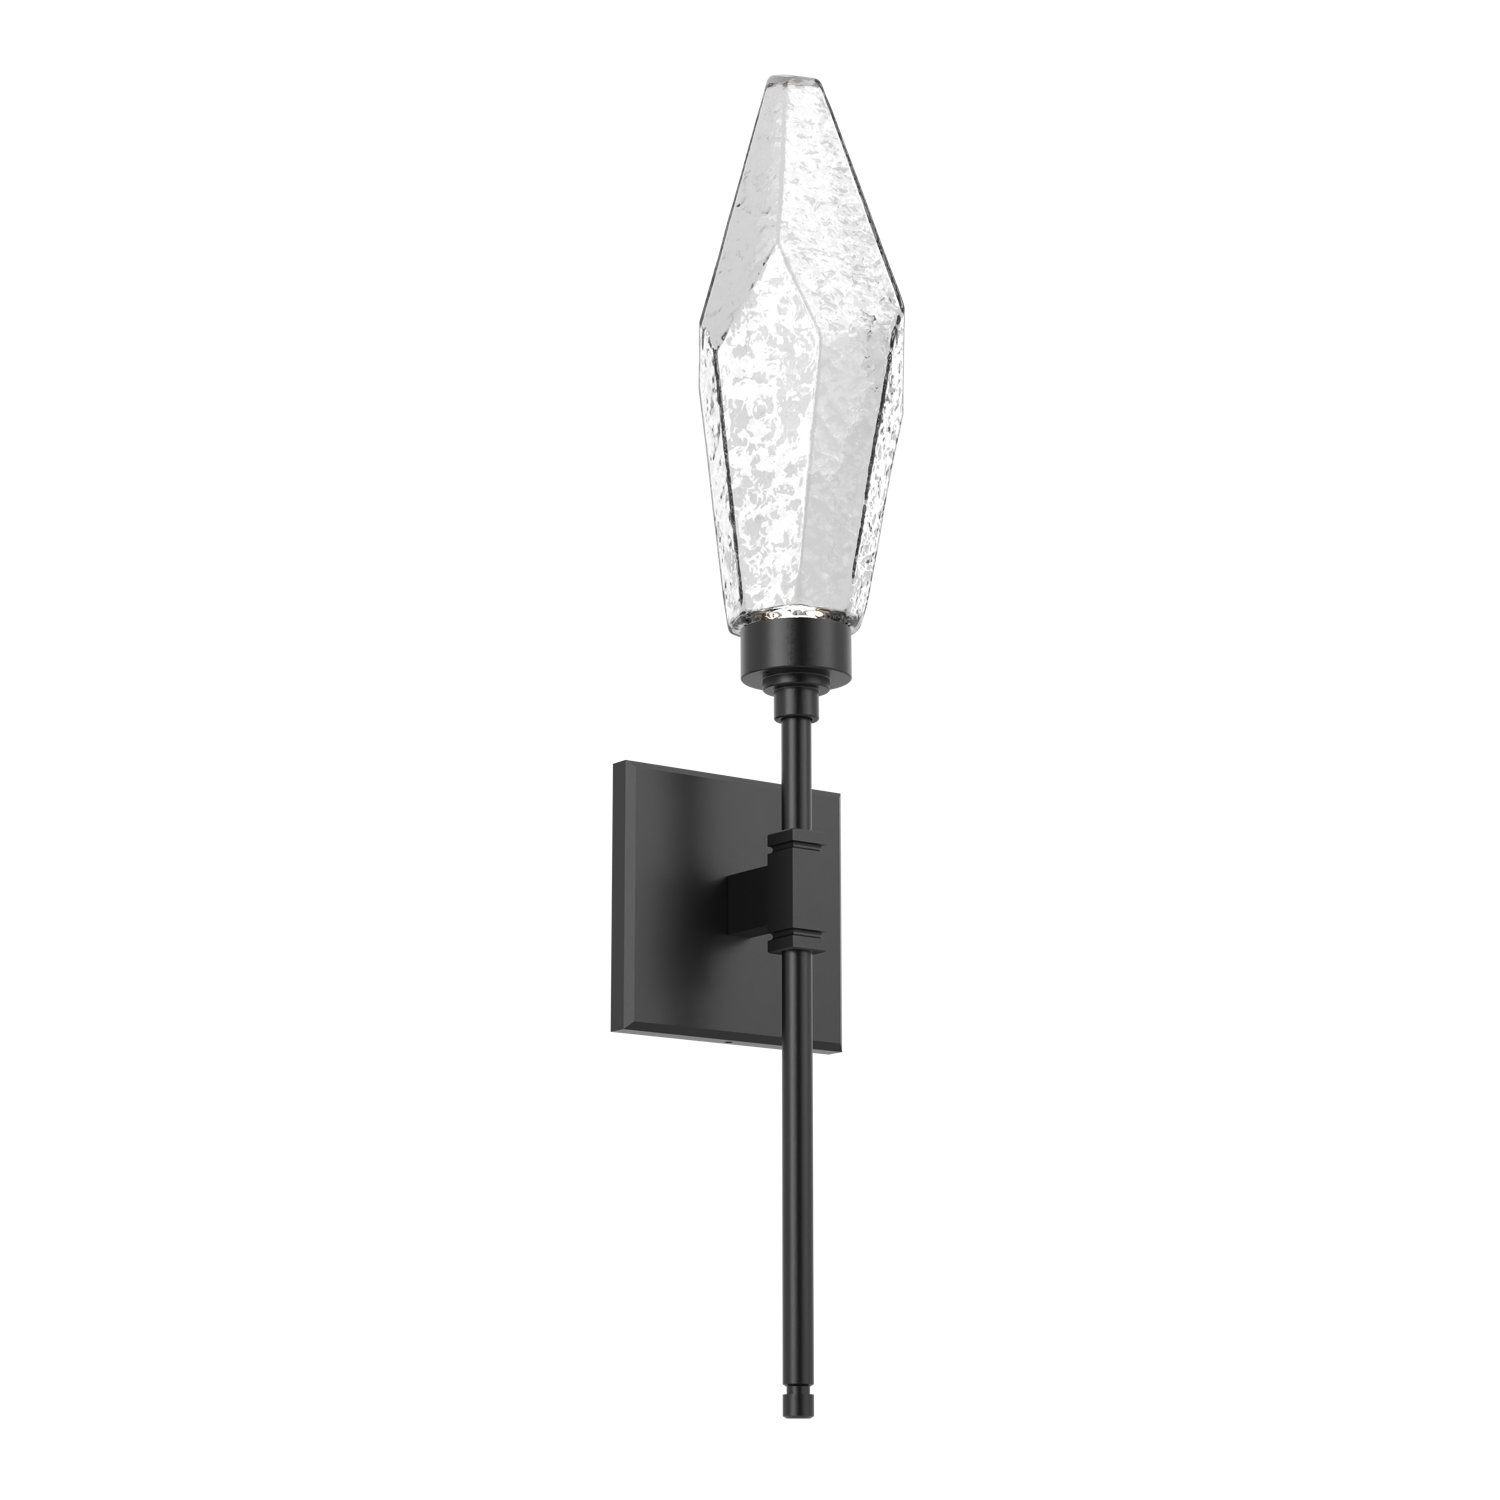 IDB0050-04-MB-CC-Hammerton-Studio-Rock-Crystal-ada-certified-belvedere-wall-sconce-with-matte-black-finish-and-clear-glass-shades-and-LED-lamping